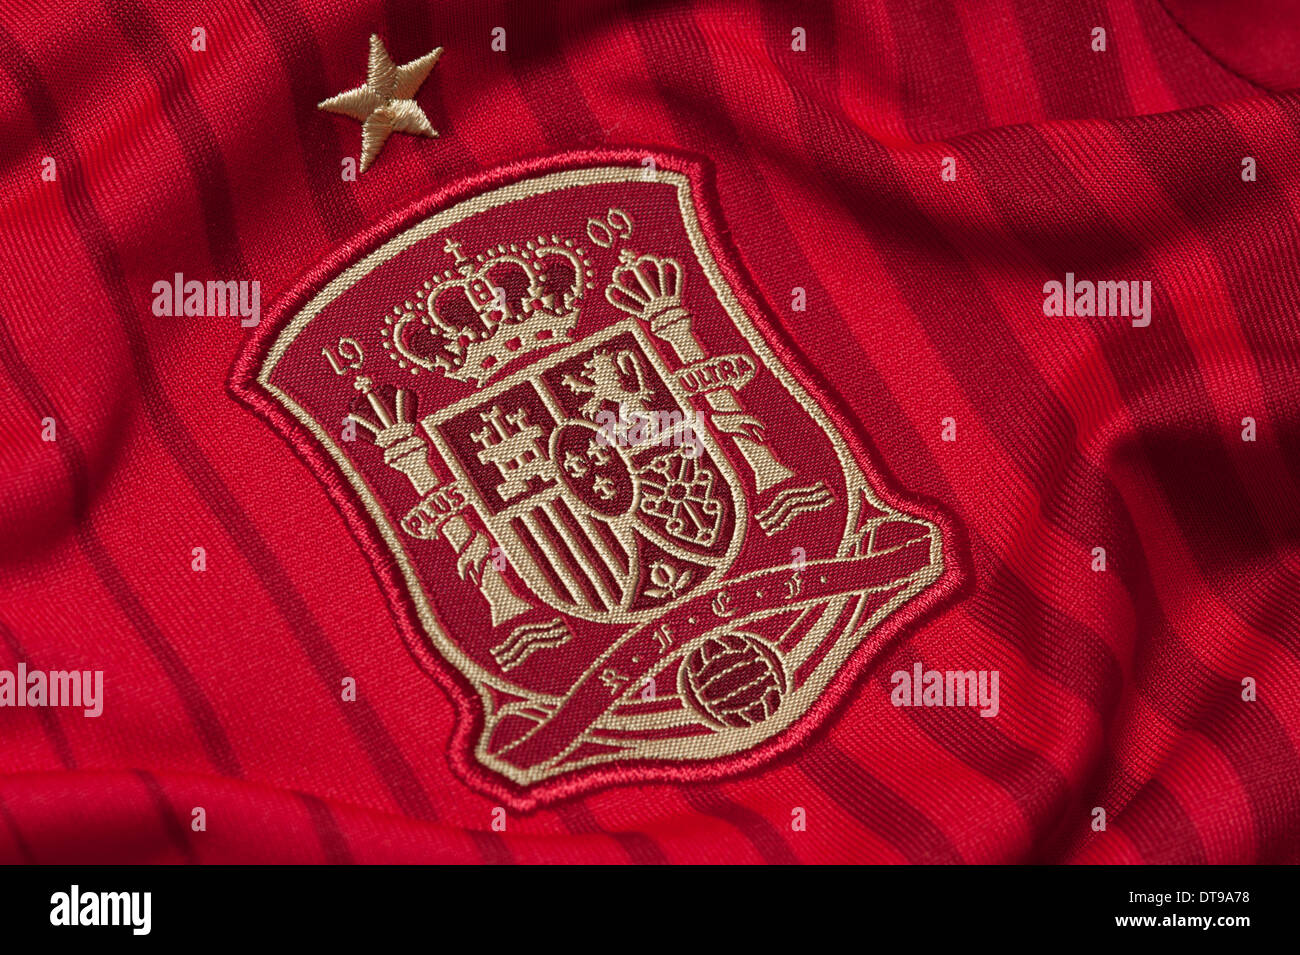 Close up of the Spanish National Football team kit Stock Photo